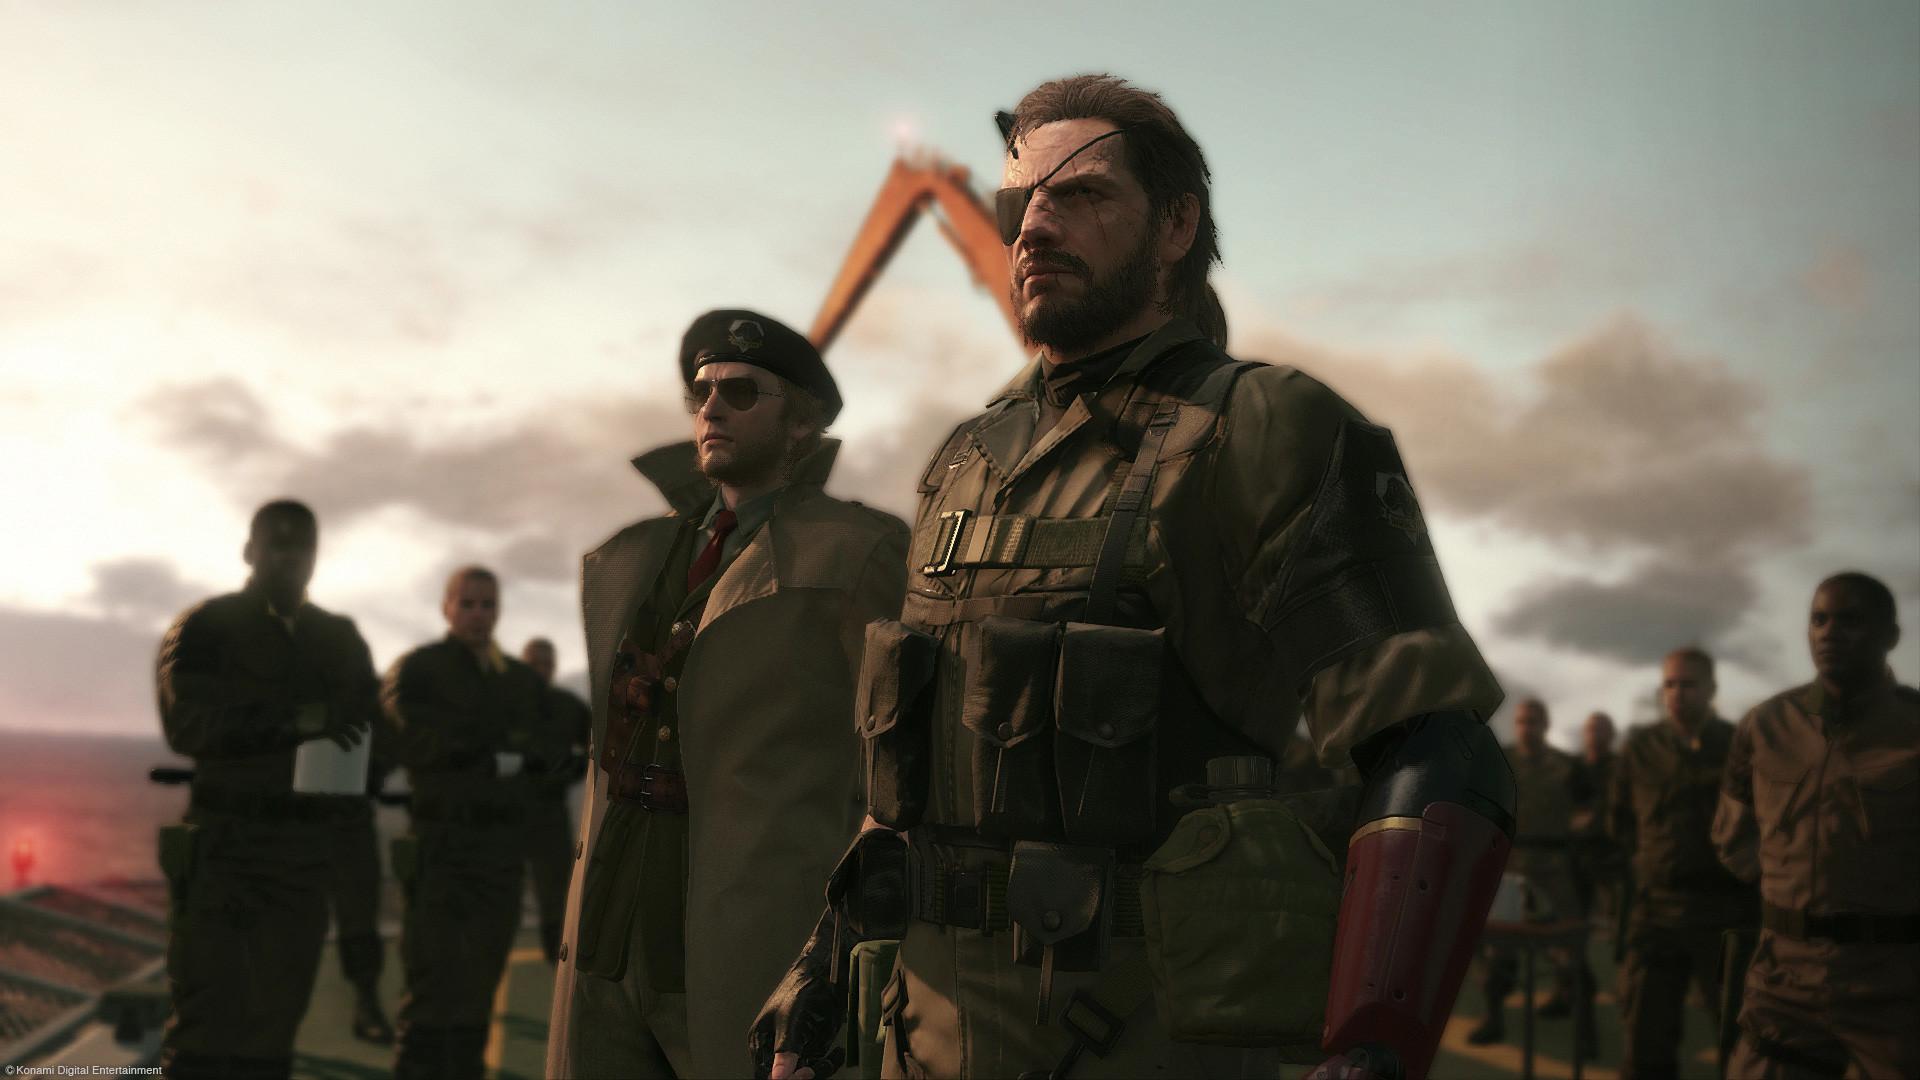 Metal Gear Solid V The Phantom Pain release date is set for September